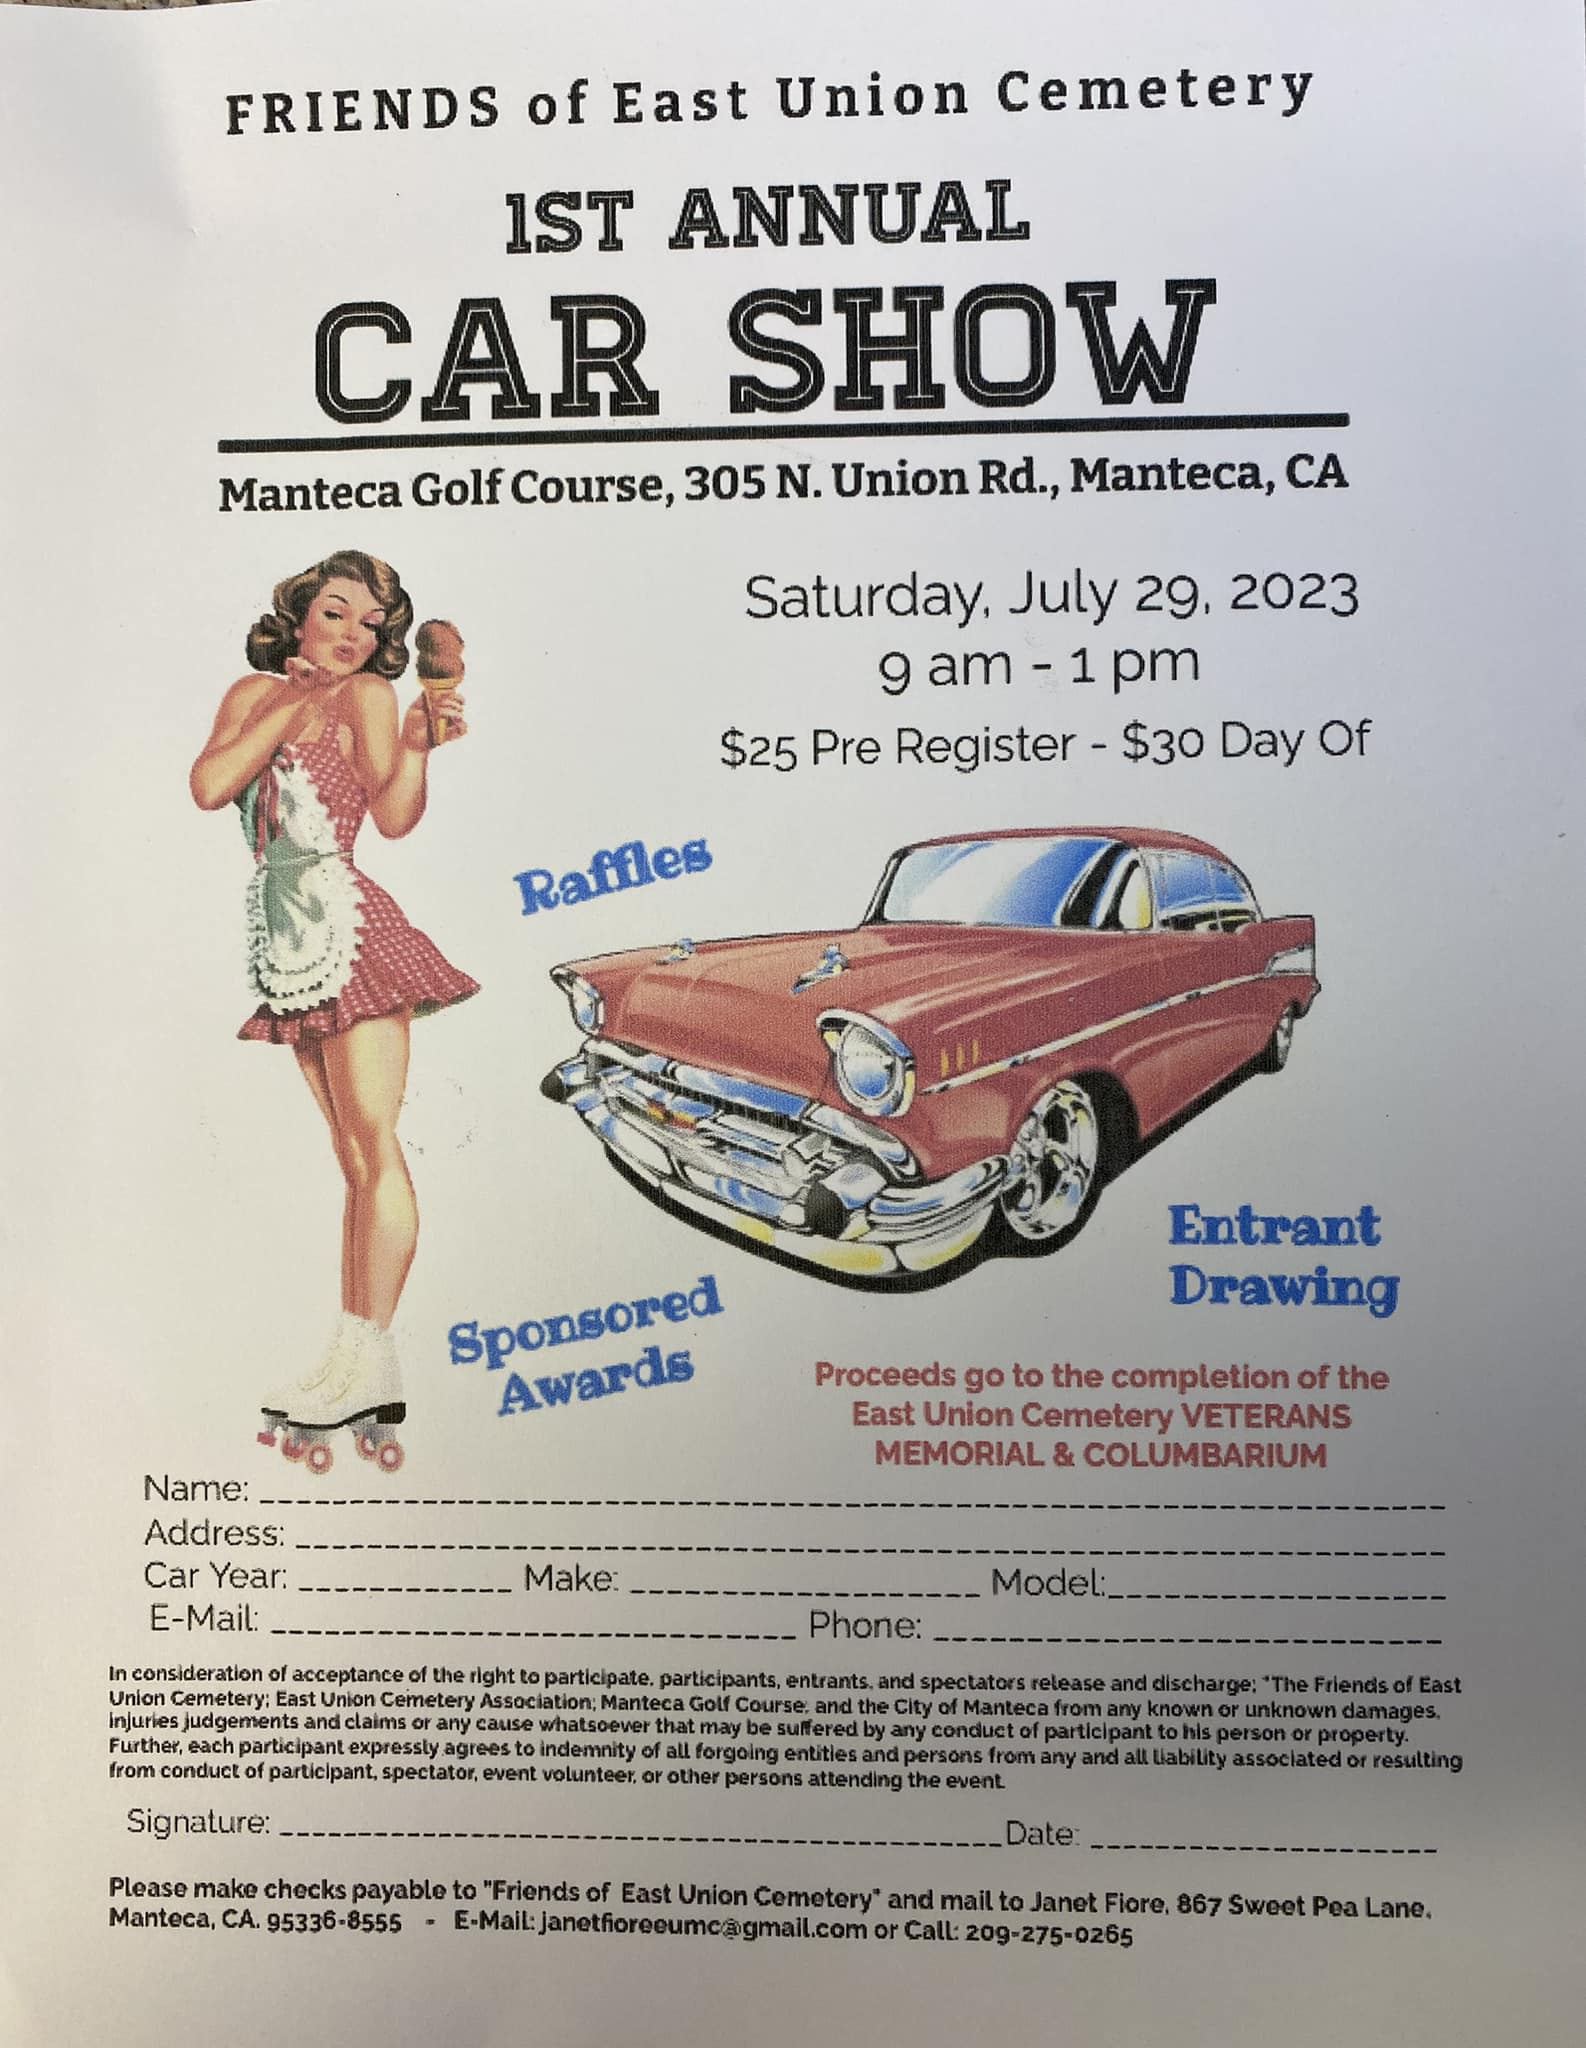 Friends of East Union Cemetery Car Show